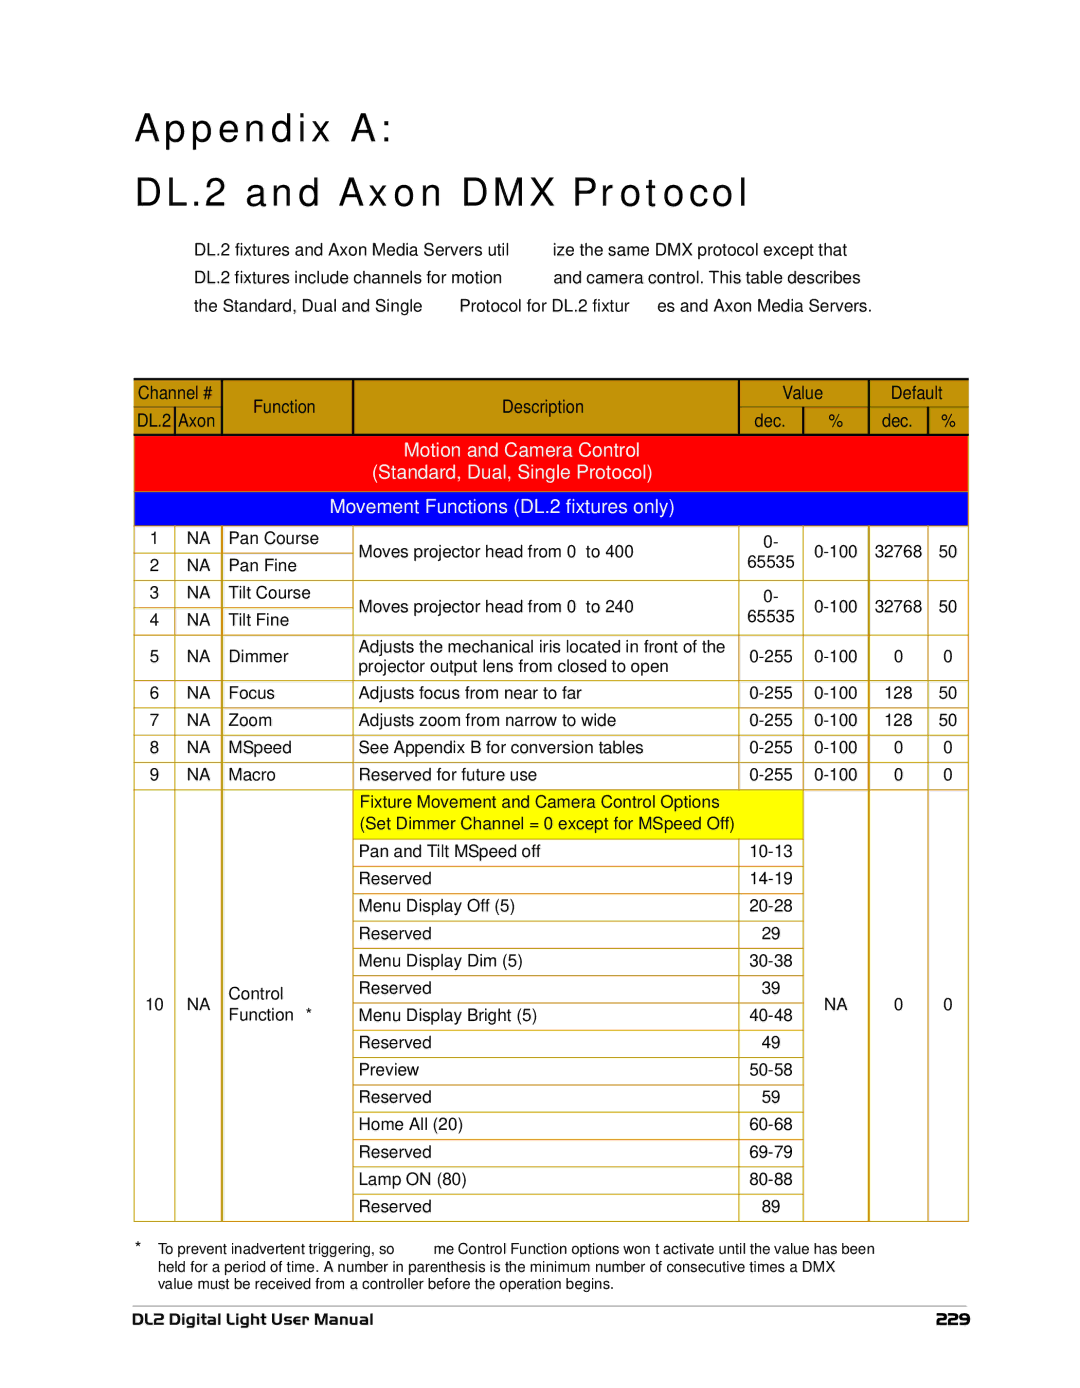 High End Systems user manual Appendix a DL.2 and Axon DMX Protocol 